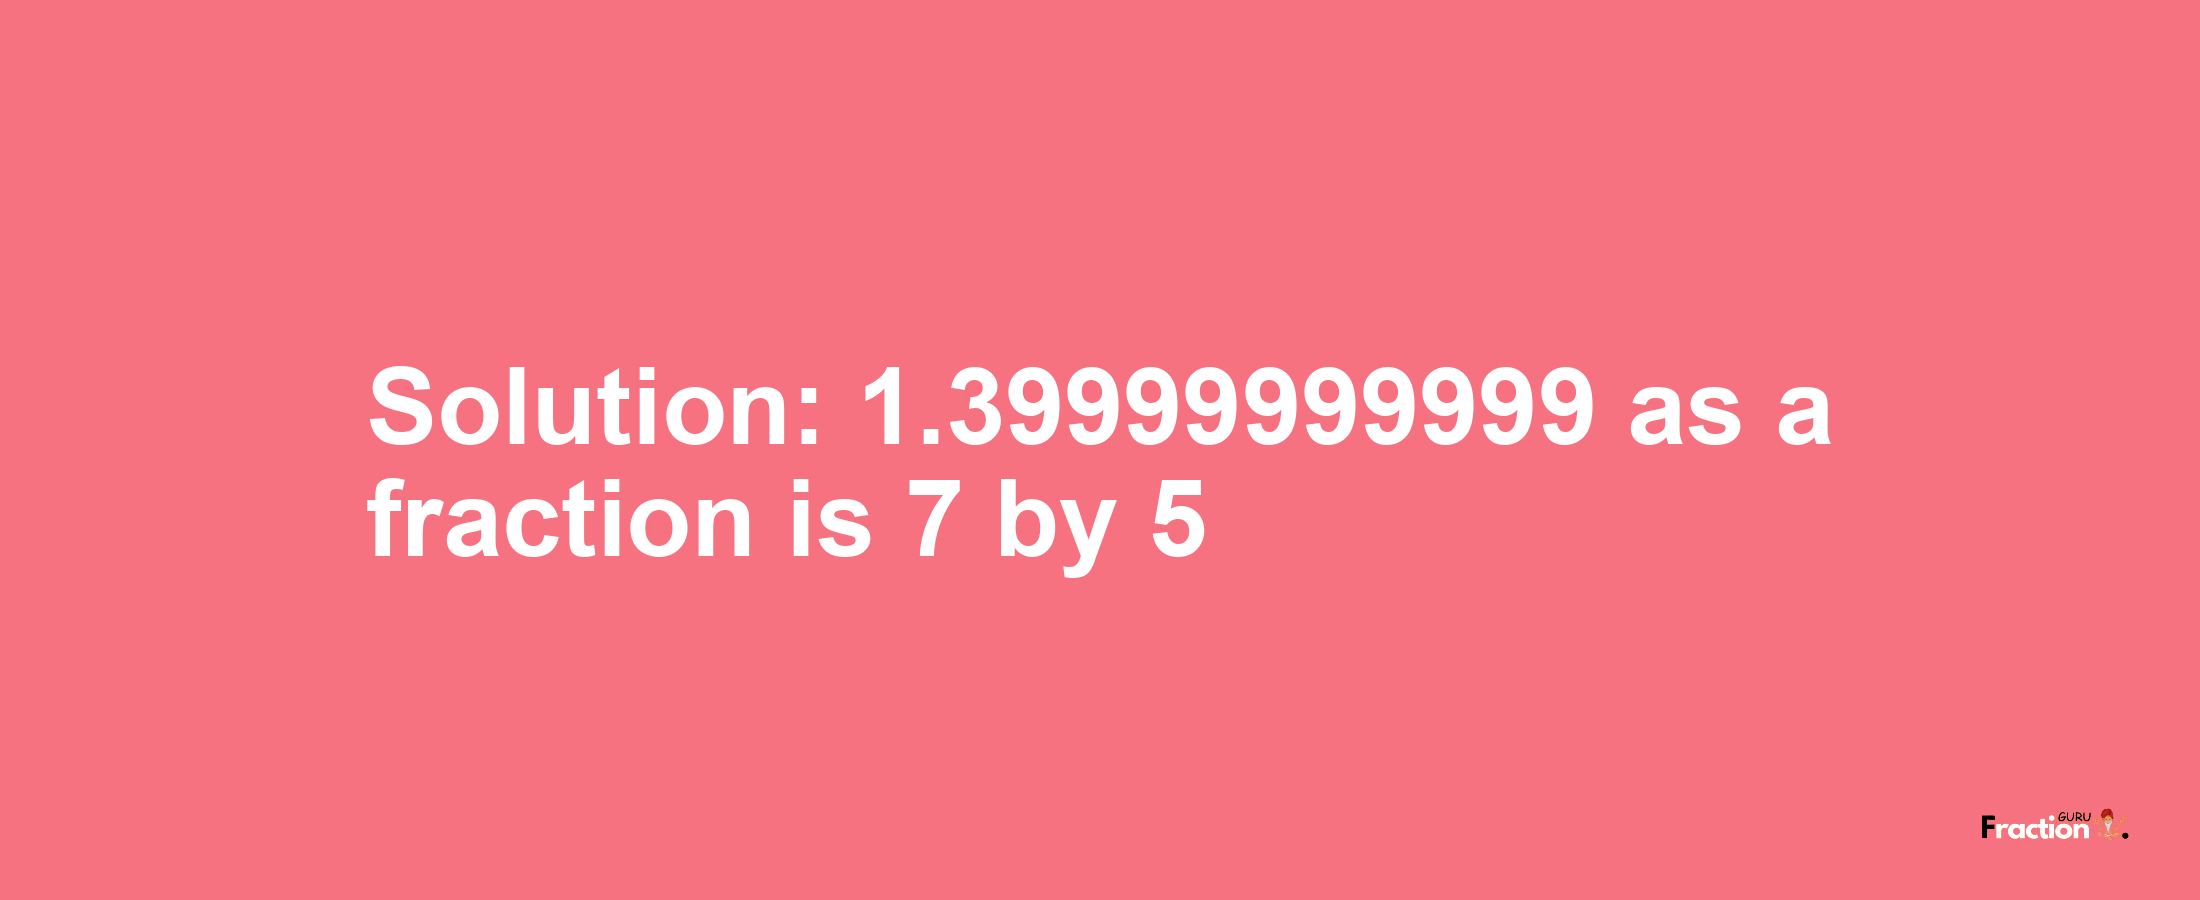 Solution:1.39999999999 as a fraction is 7/5